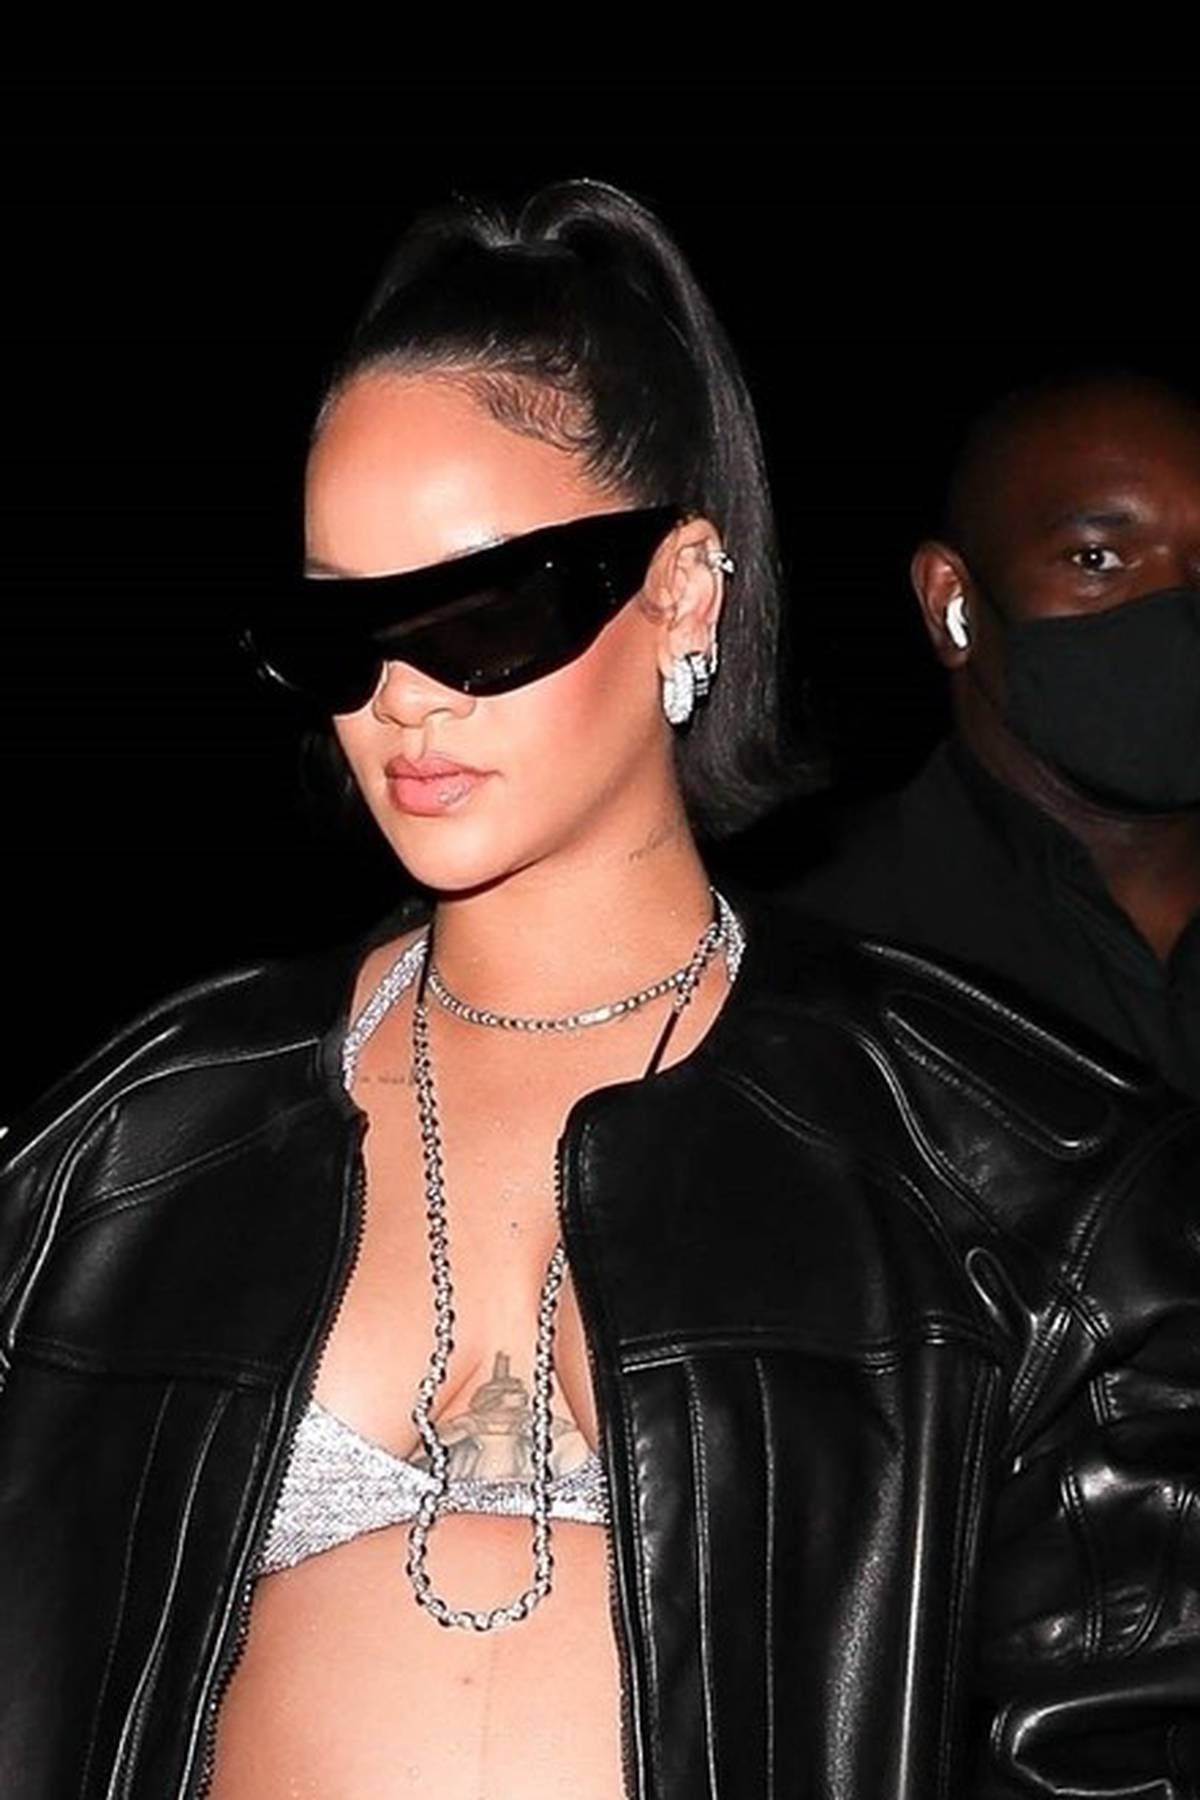 *EXCLUSIVE* Rihanna leaves little to the imagination as she grab dinner!